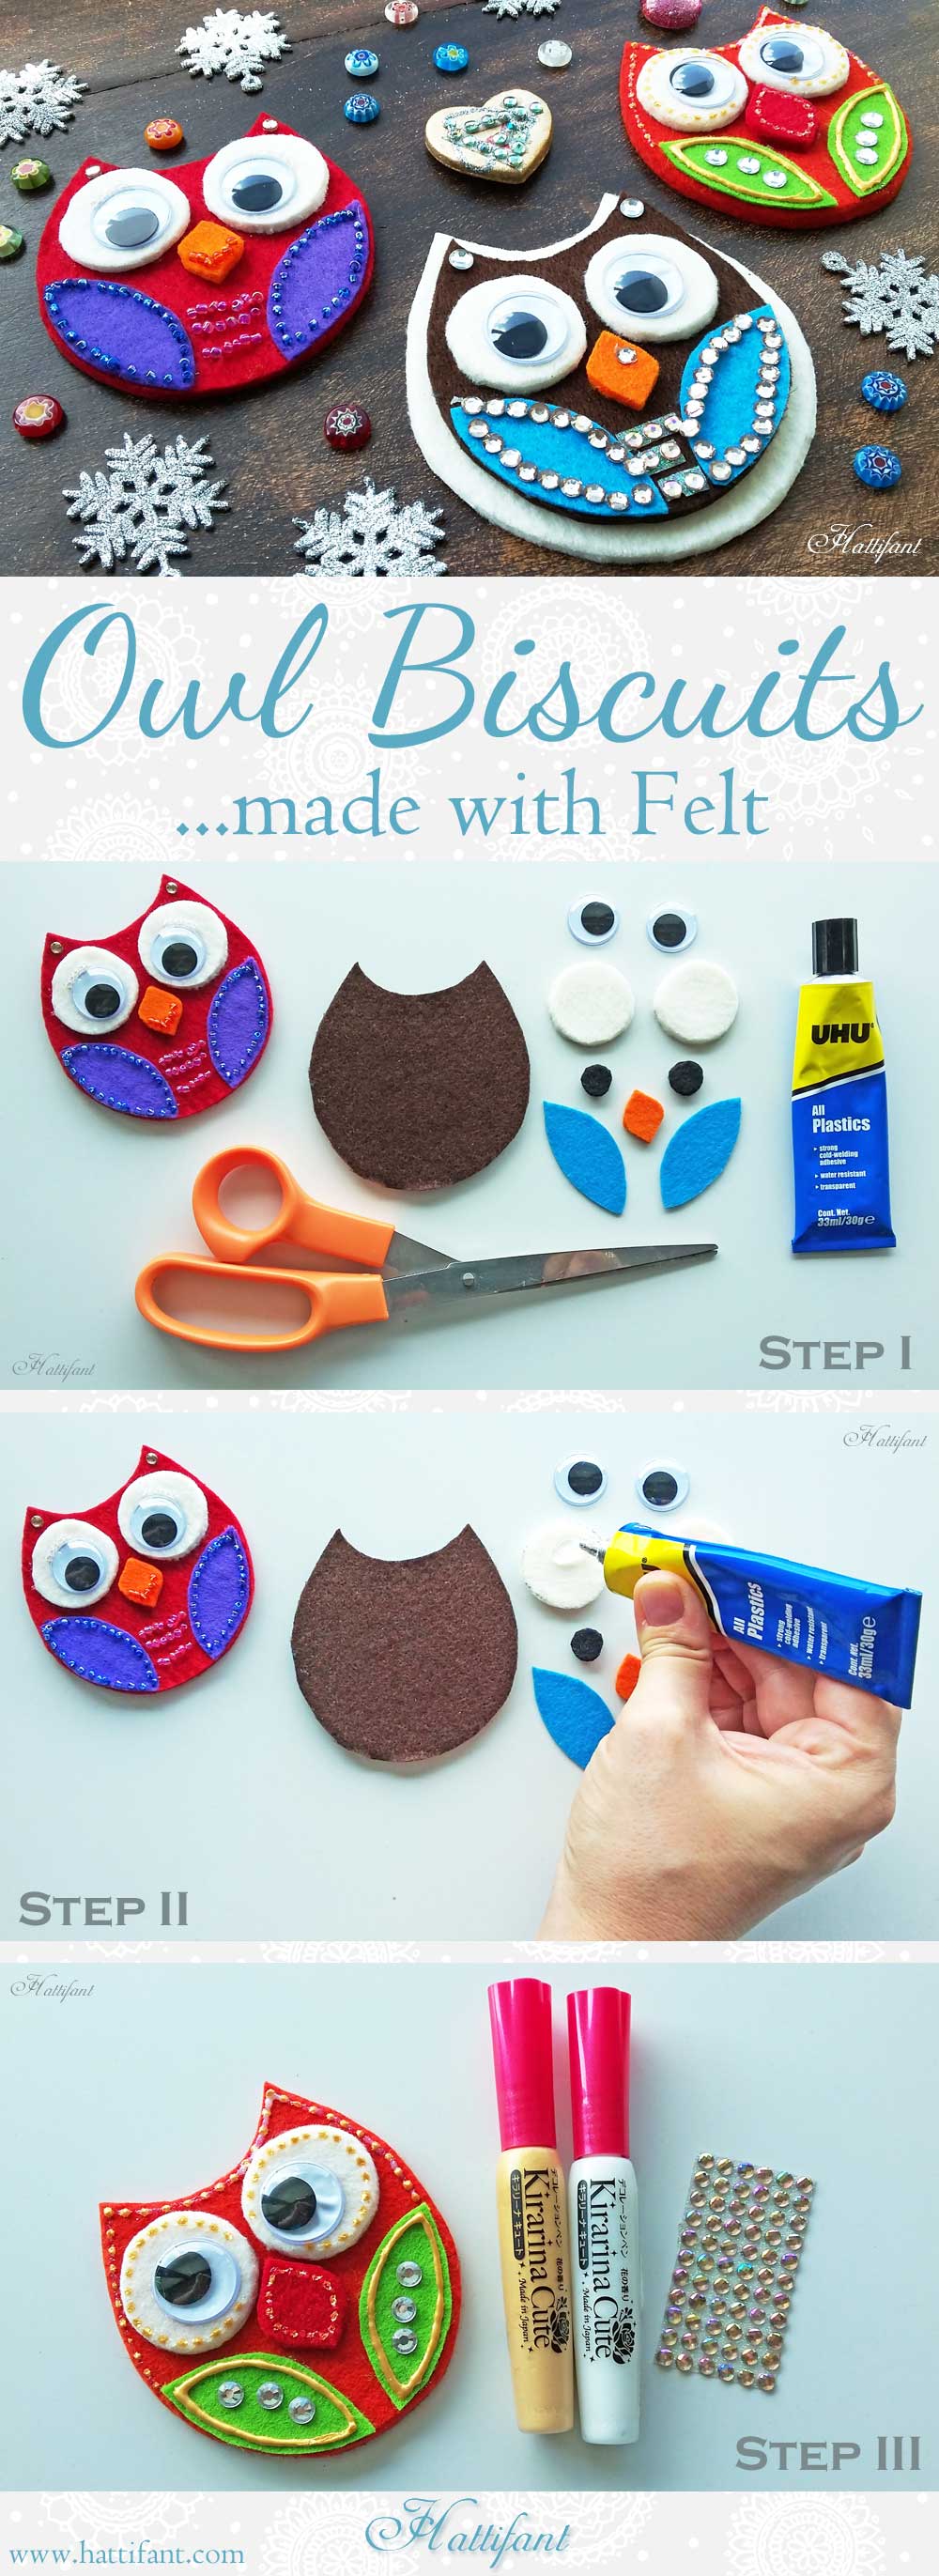 Hattifant's Owl Biscuits made with felt